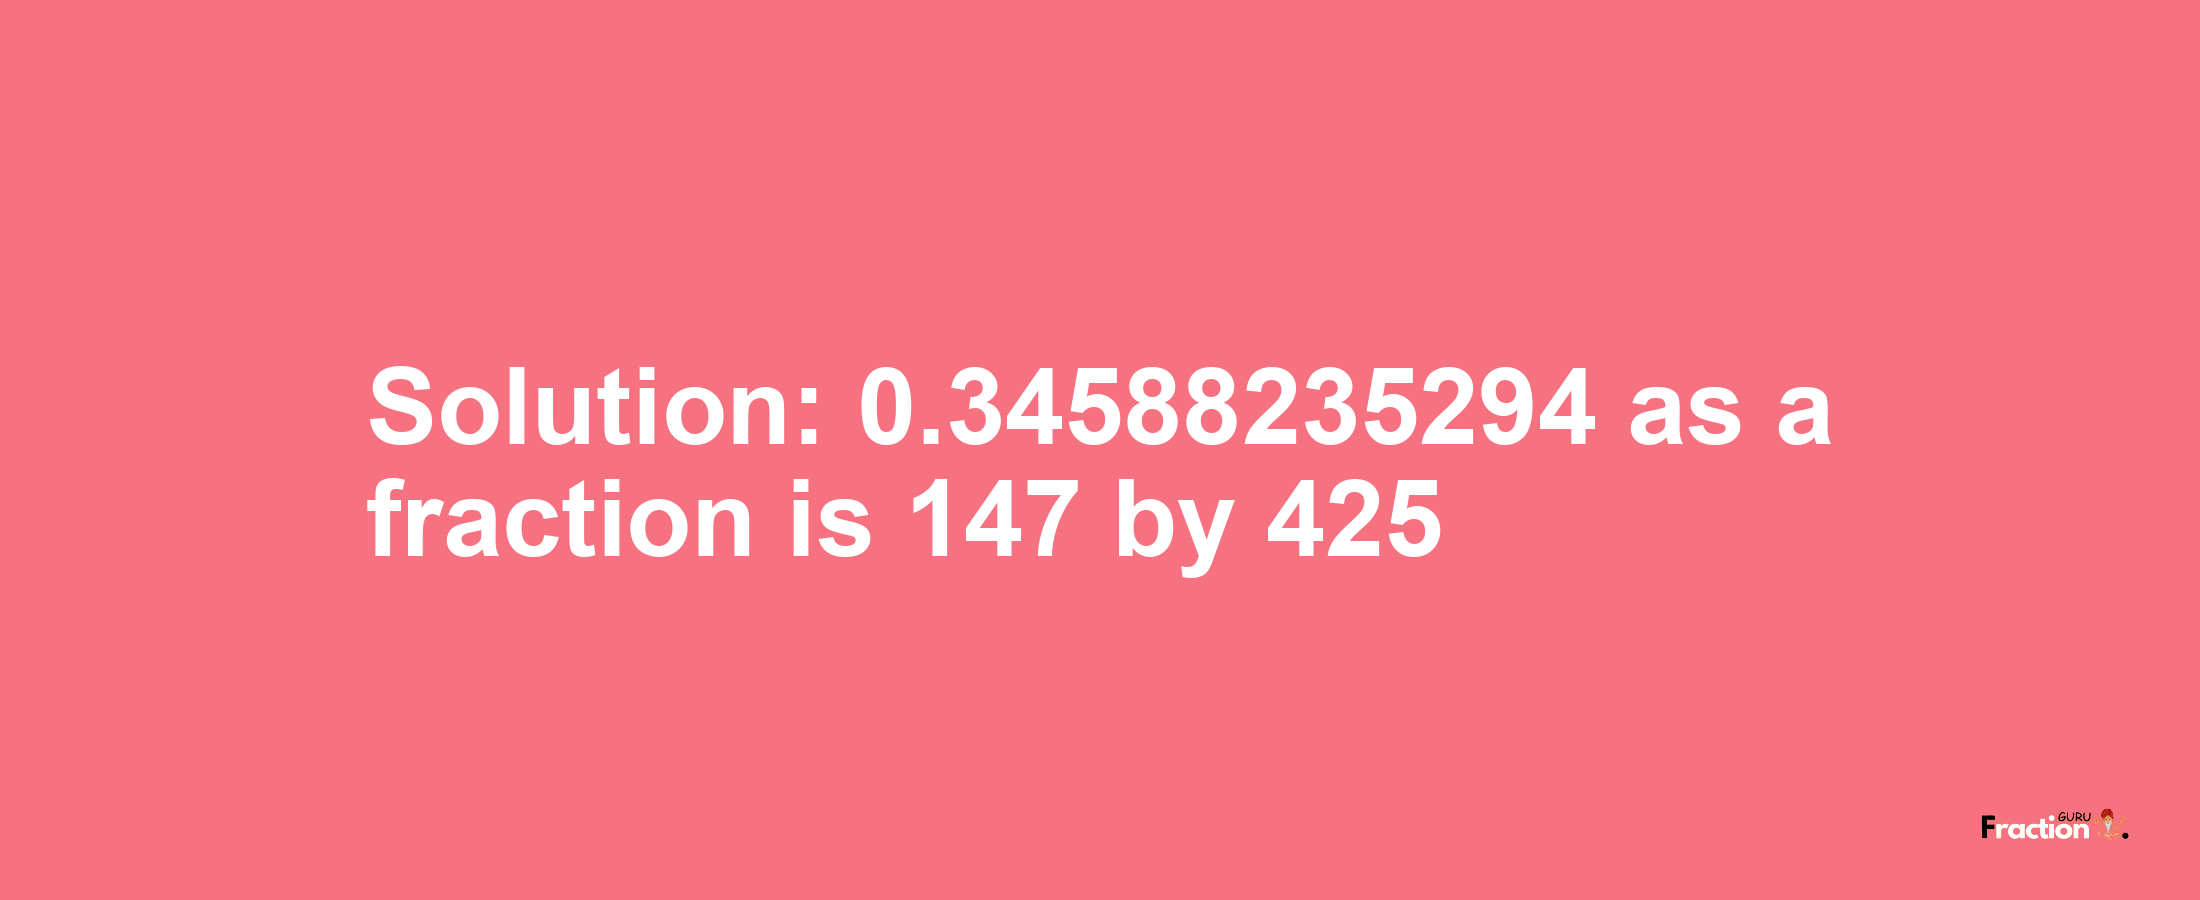 Solution:0.34588235294 as a fraction is 147/425